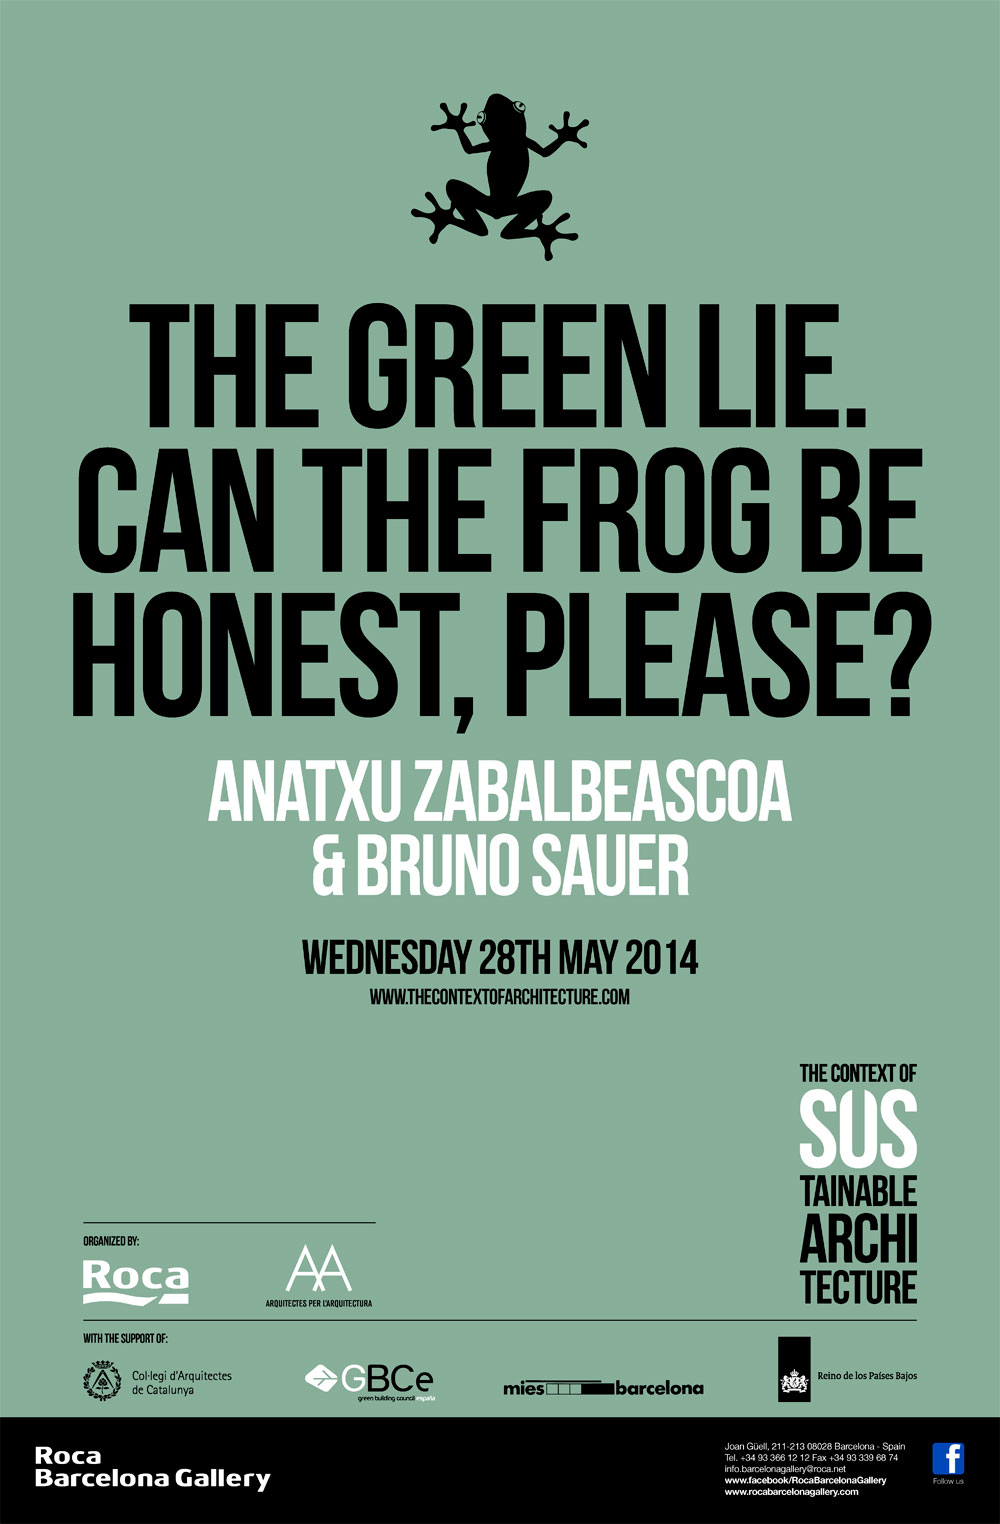 The Green Lie. Can the frog be honest, please? | Anatxu Zabalbeascoa & Bruno Sauer | The Context of Sustainable Architecture